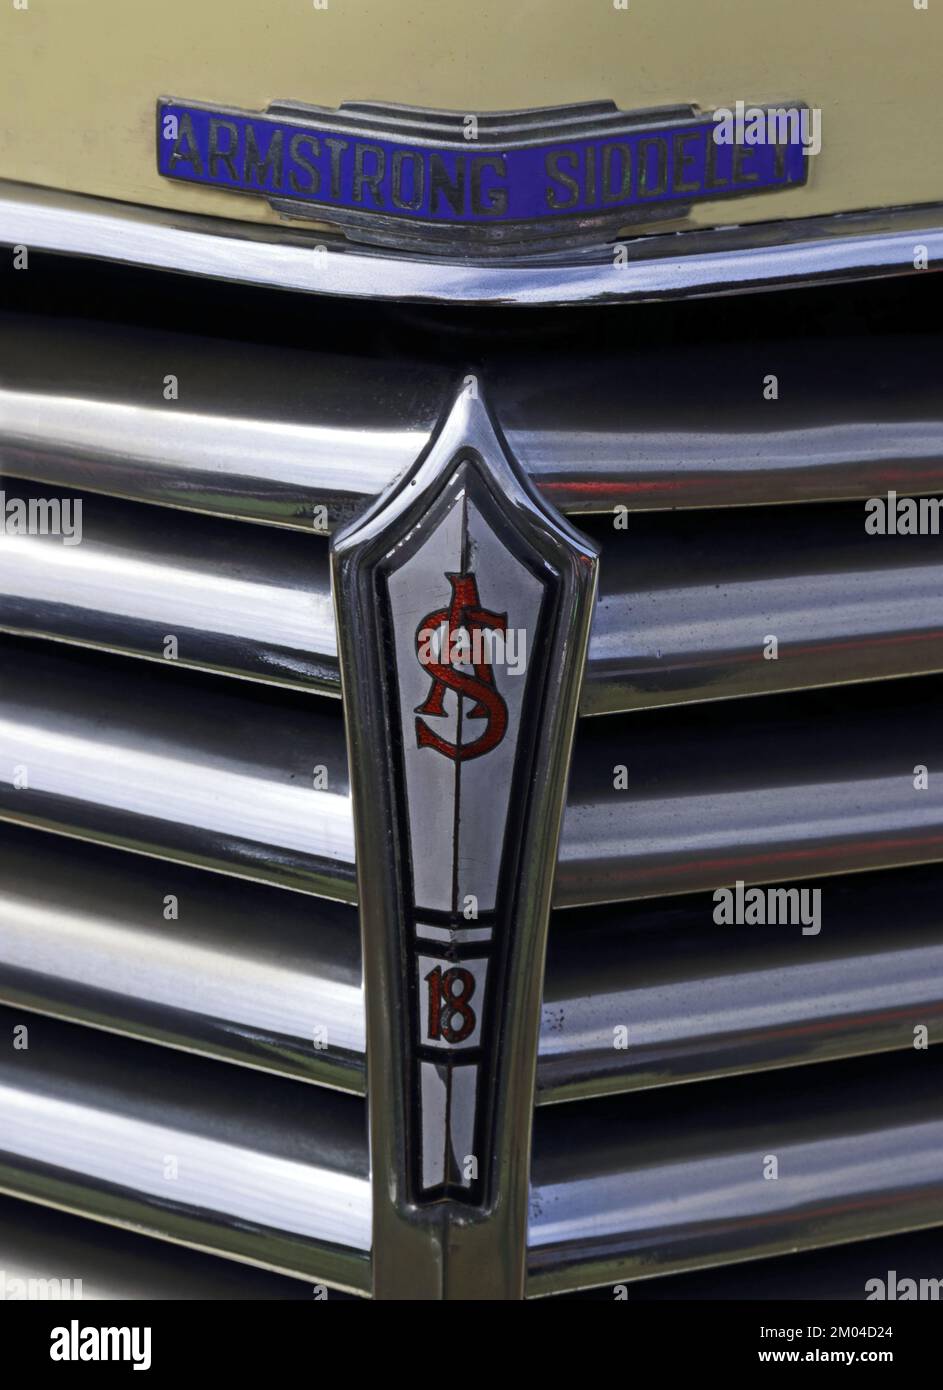 Armstrong Siddeley badge and logo on radiator grille Stock Photo